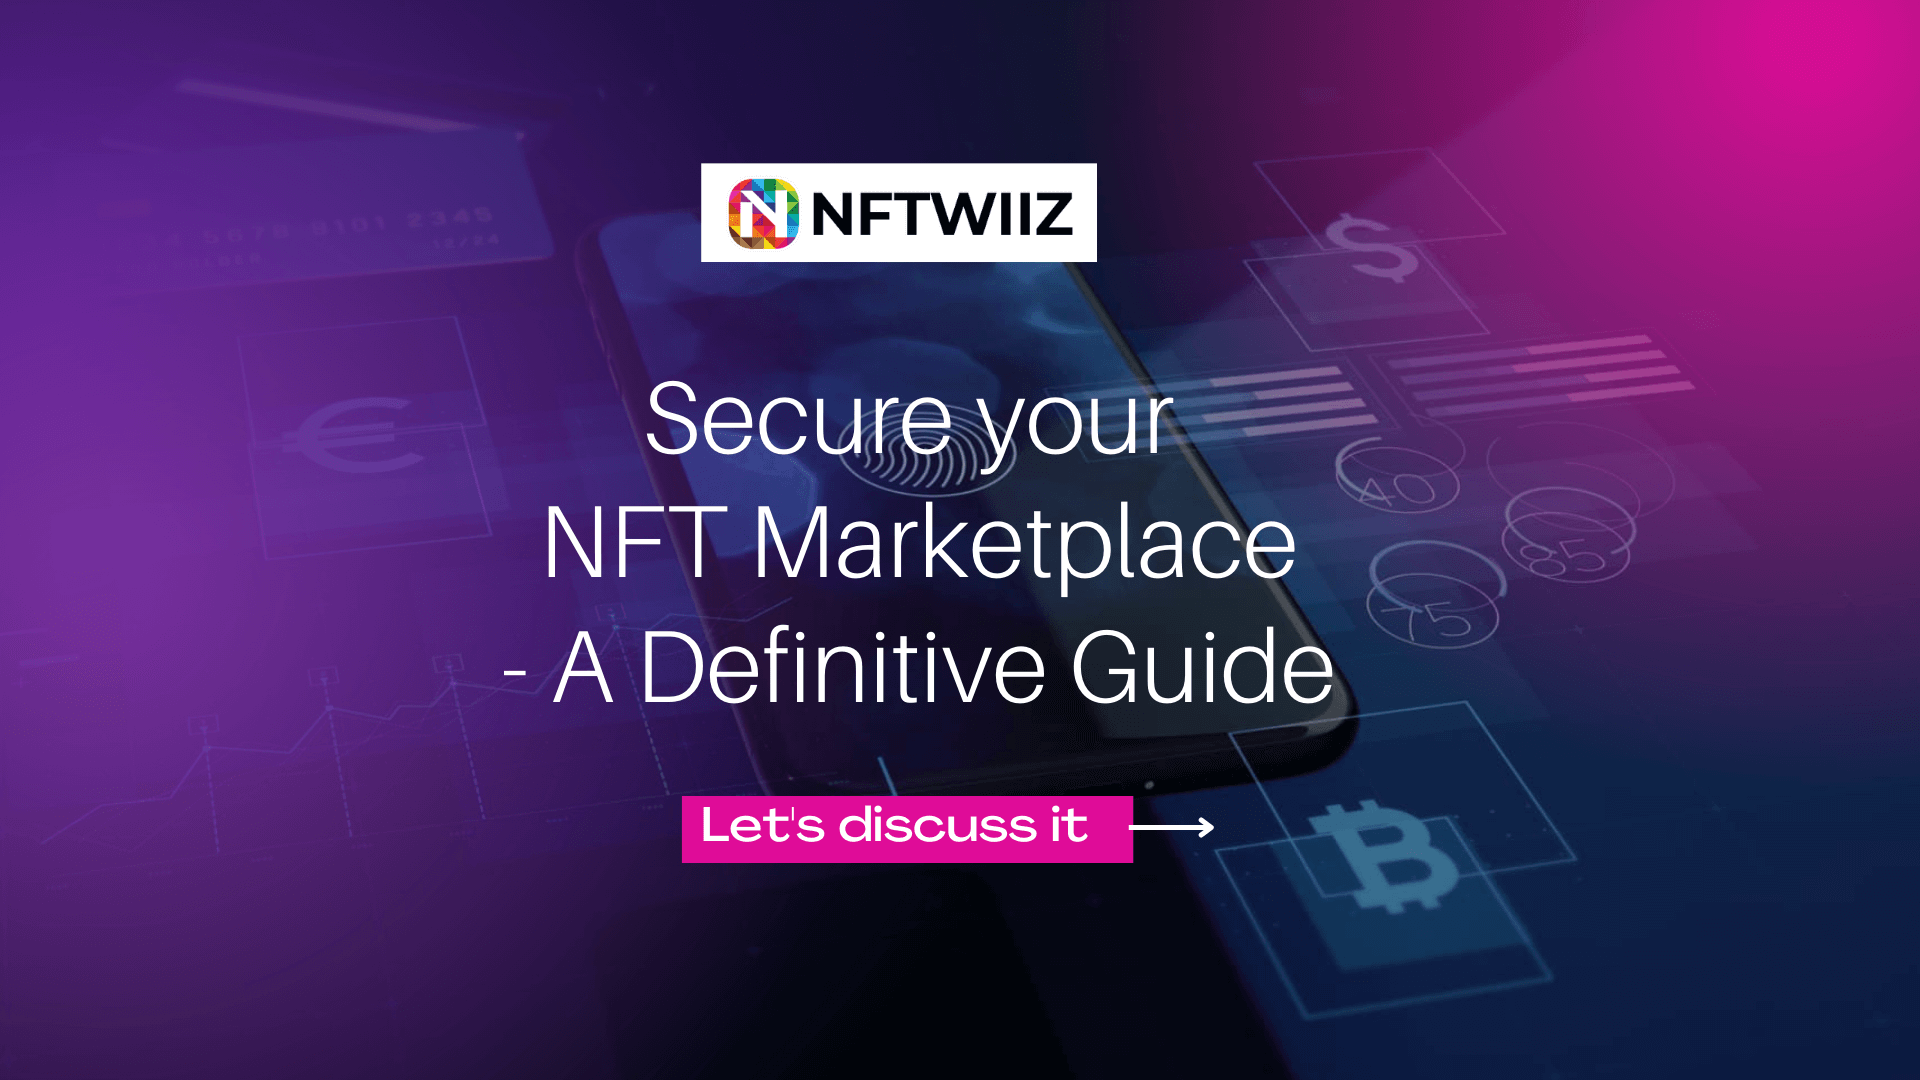 Secure-your-NFT-Marketplace-A-Definitive-Guide-NFTWIIZ